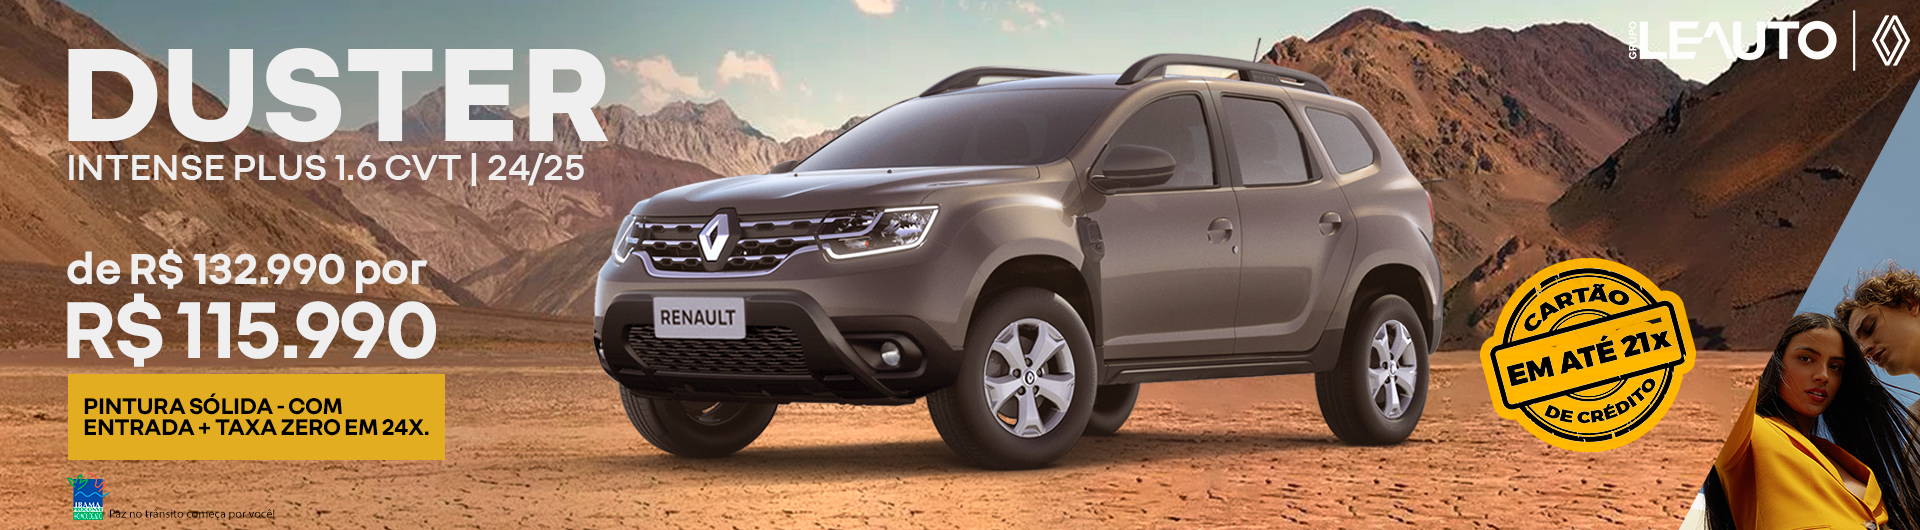 DUSTER INTENSE - RENAULT - LEAUTO